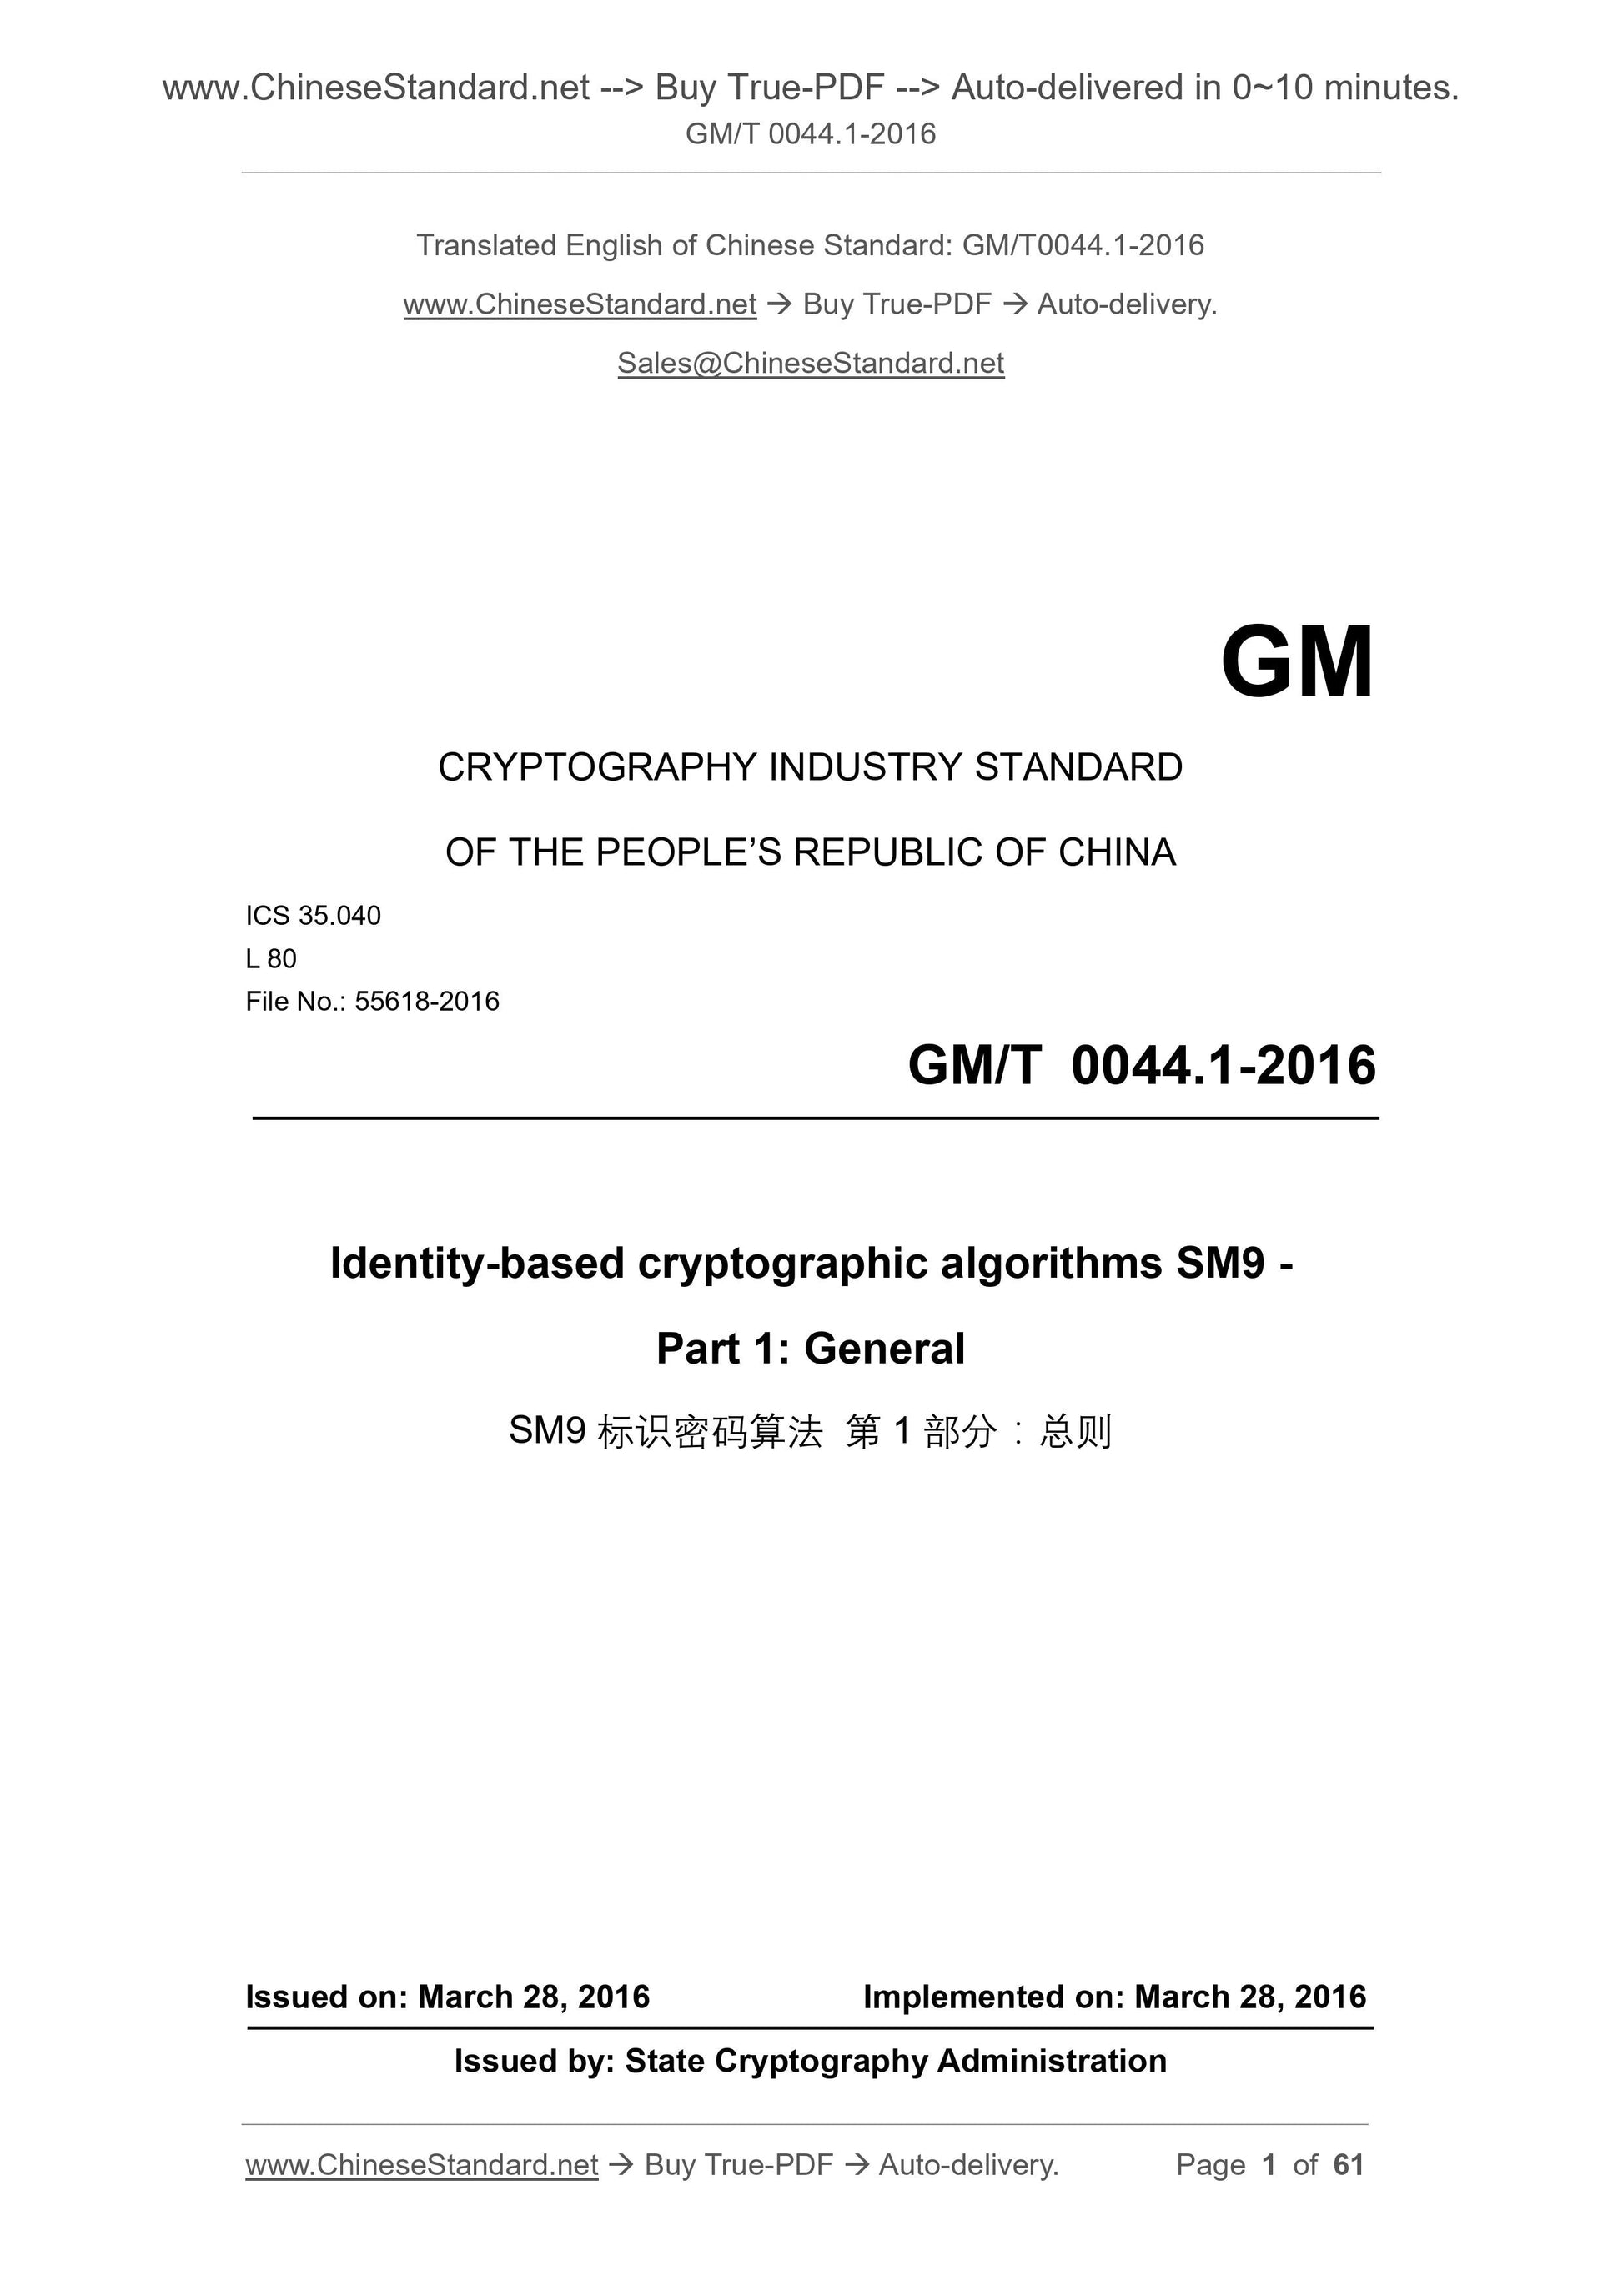 GM/T 0044.1-2016 Page 1